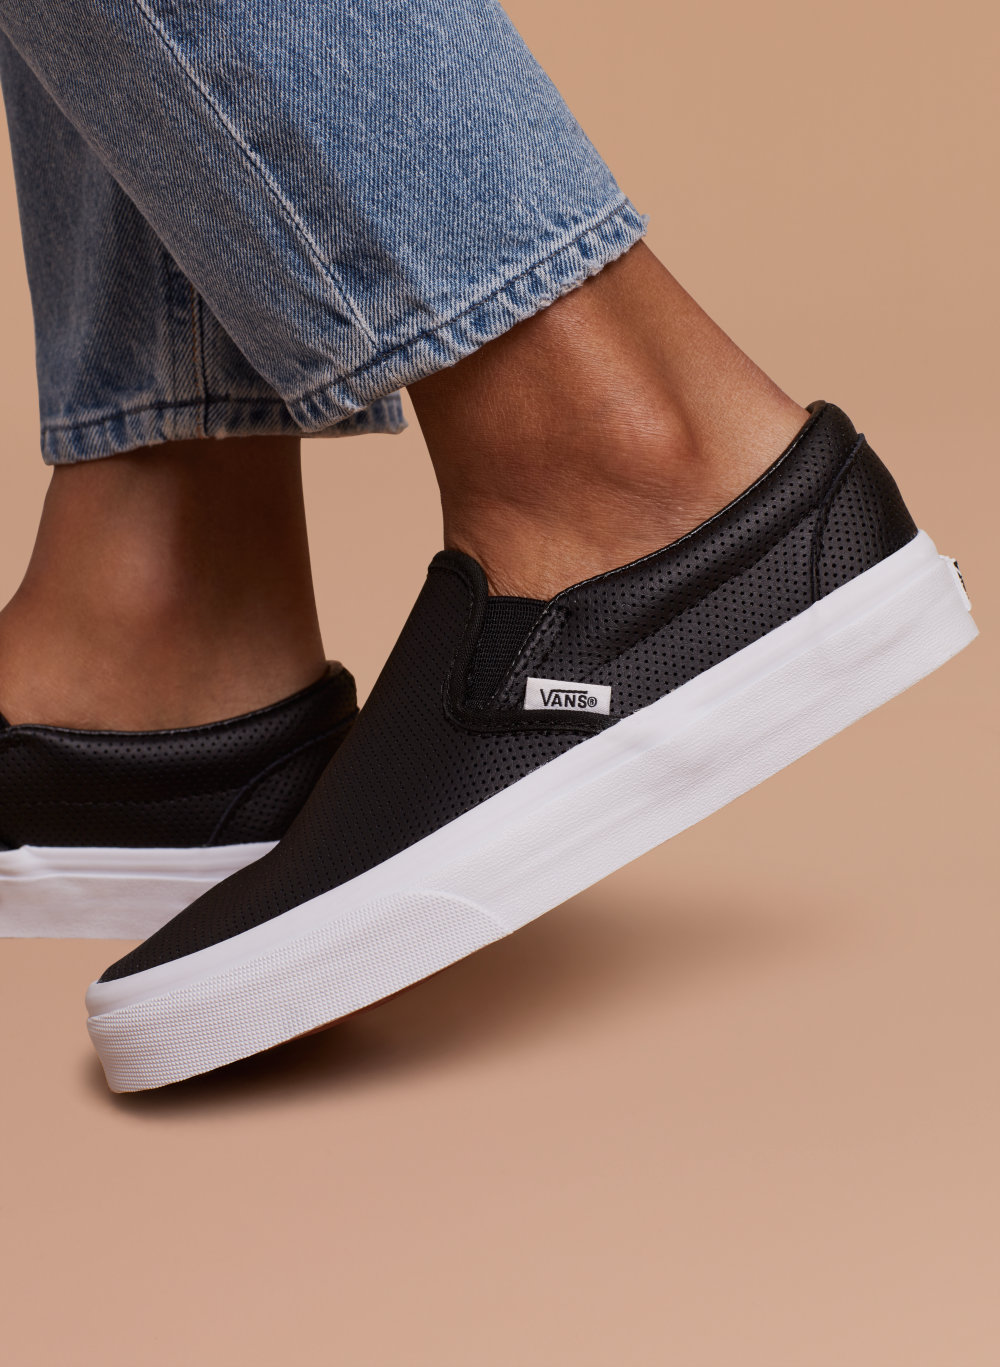 vans perforated leather slip on nz